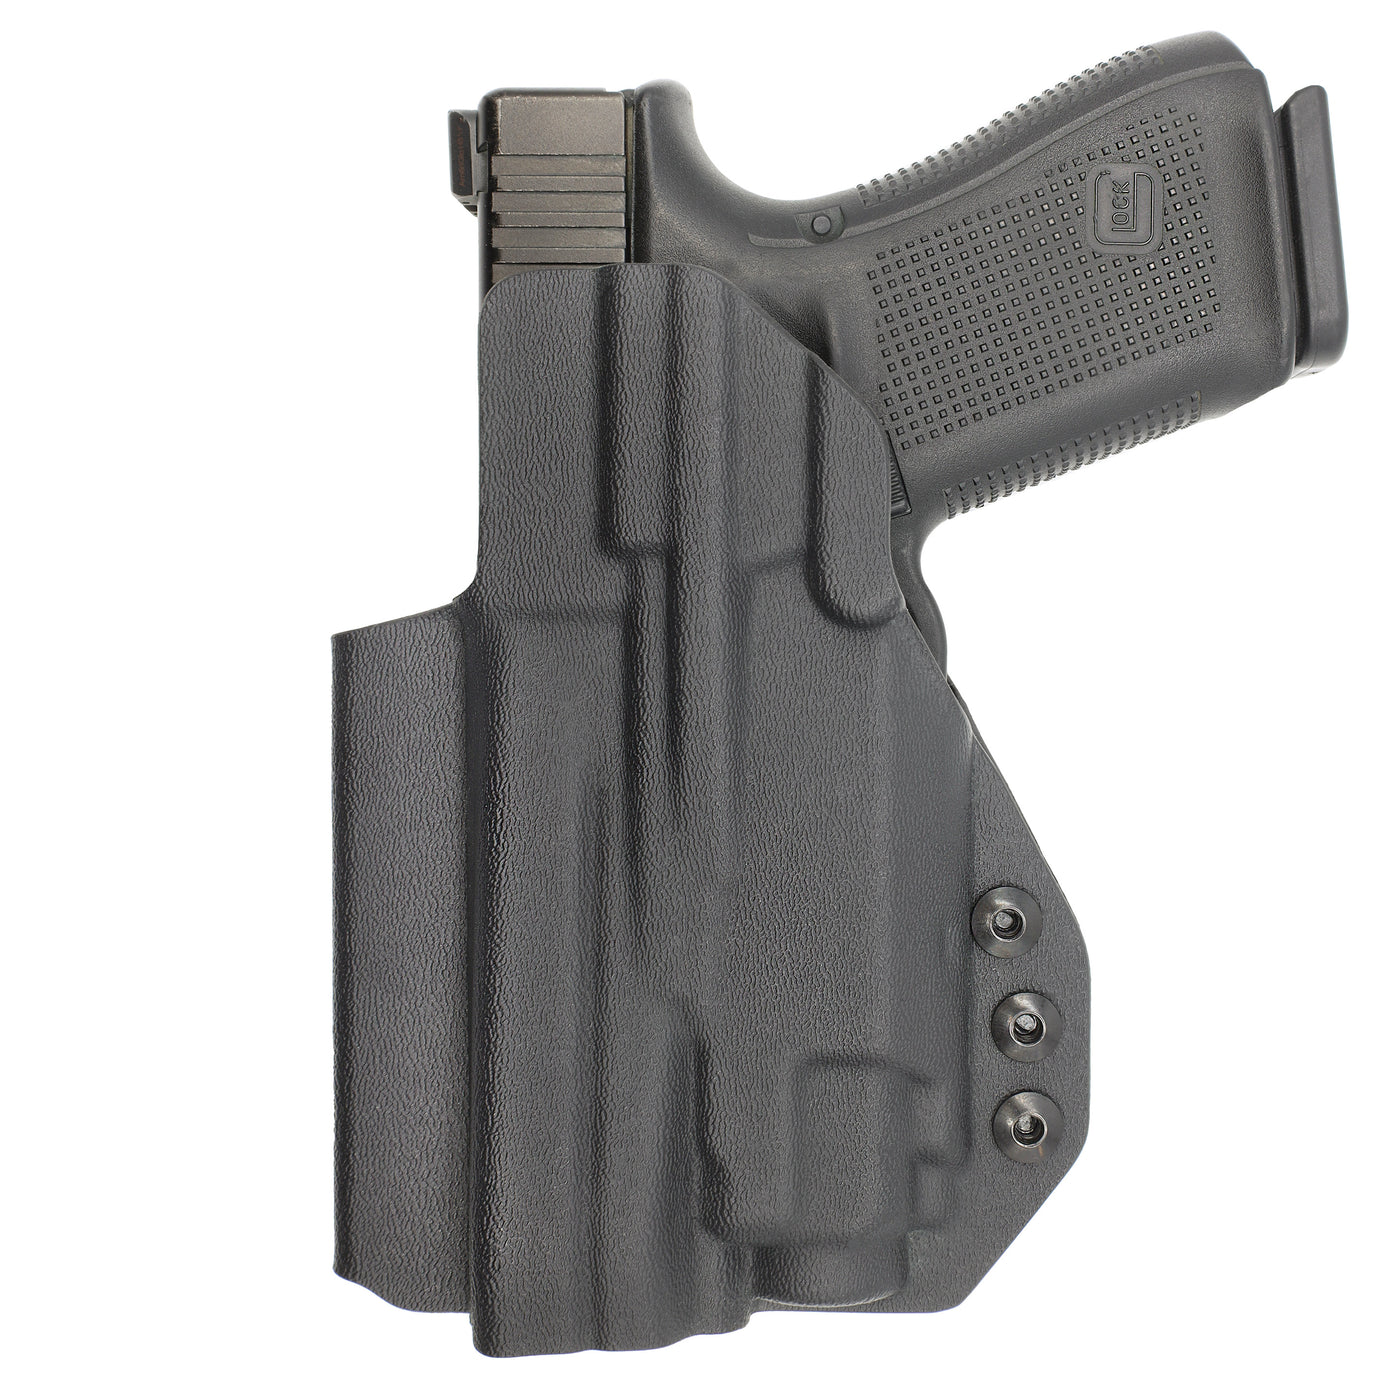 C&G Holsters quickship IWB Tactical Shadow Systems Streamlight TLR8 holstered back view